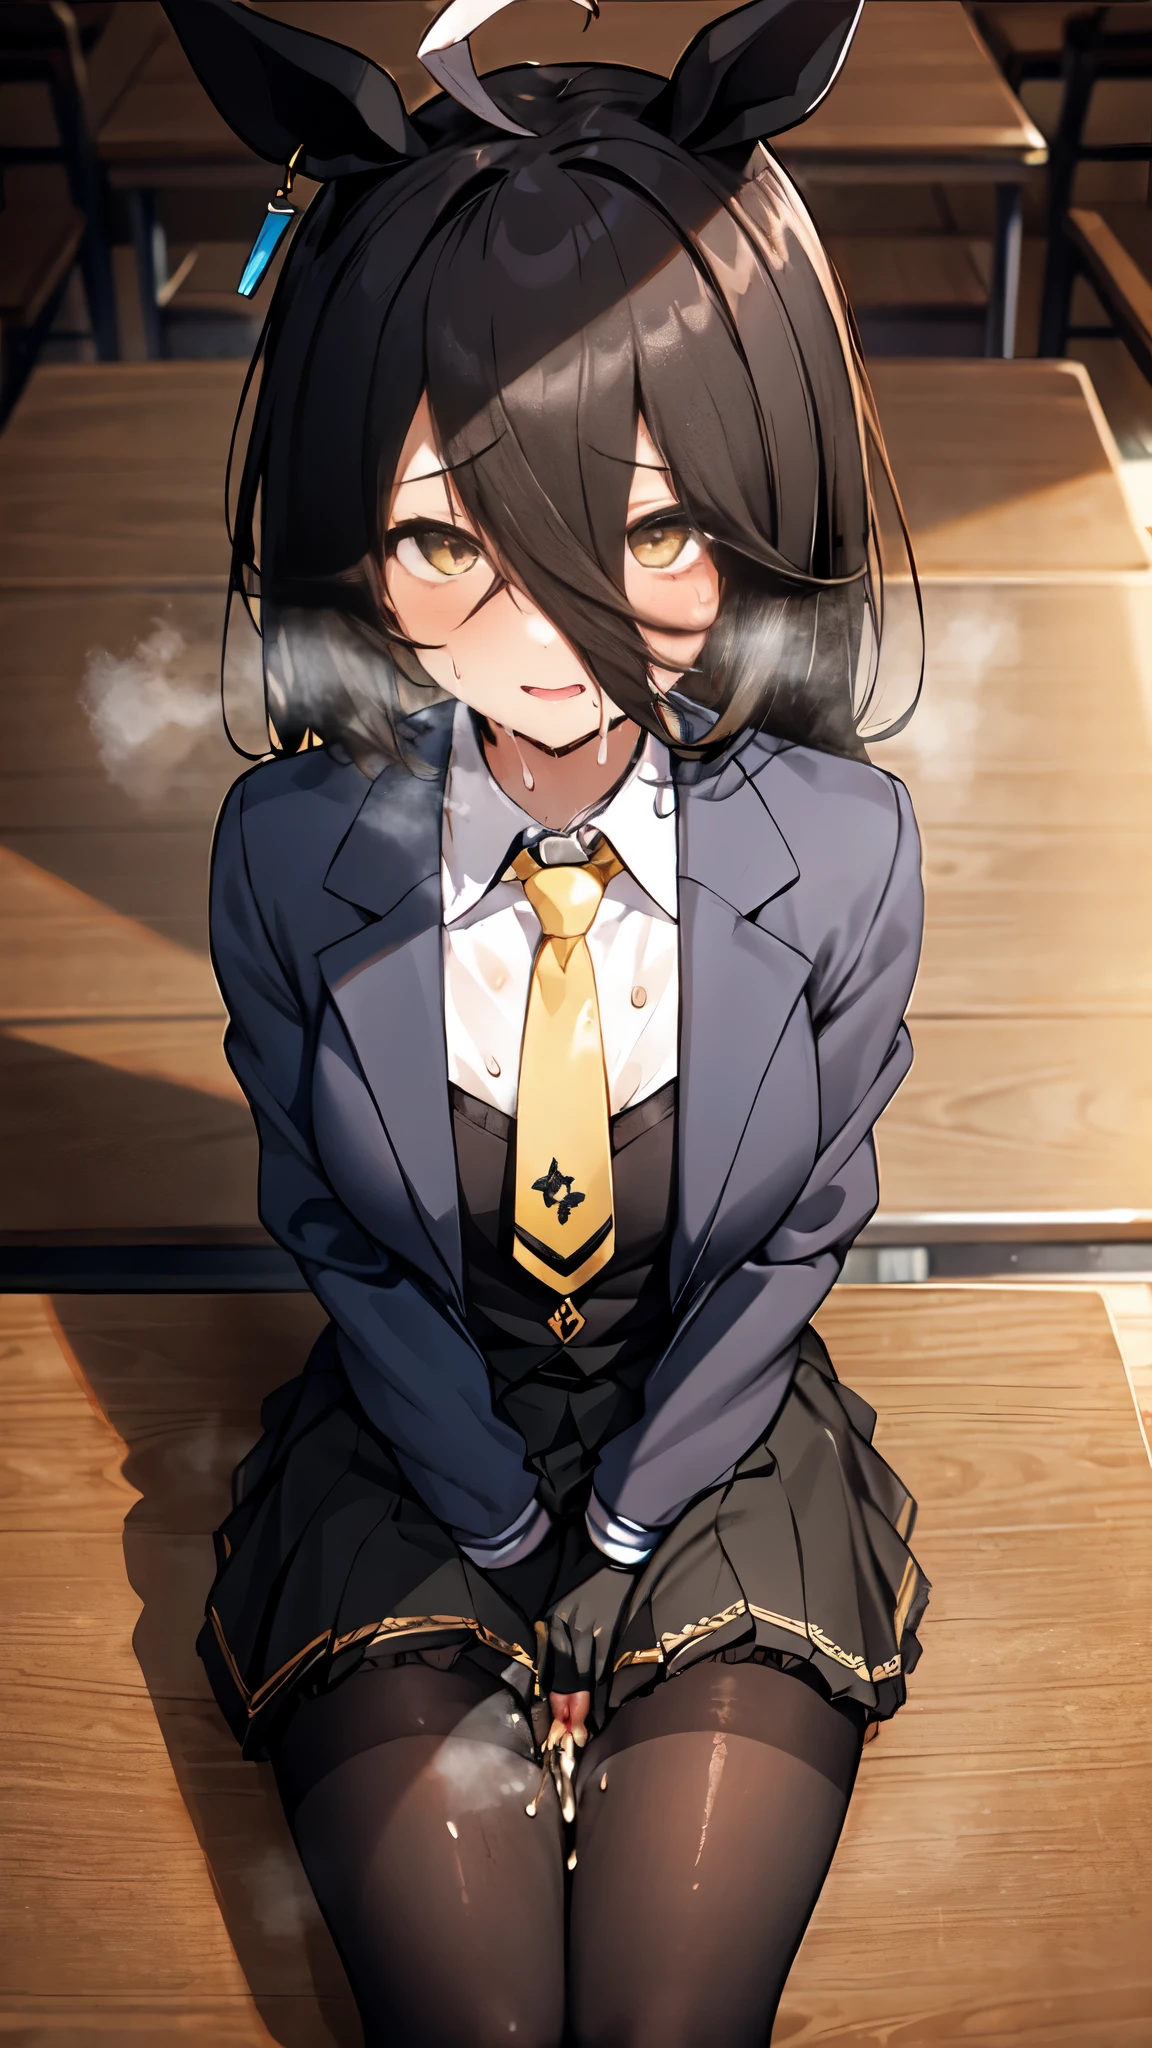 NSFW,((table top, highest quality)),(1 girl:1.5),manhattan cafe,manhattan cafe(racing wear),Uma Musume,horse ears,hair_between_eye,(alone:1.2),pantyhose,length_hair, black_hair, black Gloves,yellow_eye,Ahoge,tie,black_Jacket,skirt,black_footwear,I&#39;m in heat,excited,pants are visible,1 male,My pussy is being touched,shy,sex,A dick is inserted,On your back,Creampie,sexual treatment,sex slave,(Sweat:1.5),eyeが蕩けている,fall of pleasure